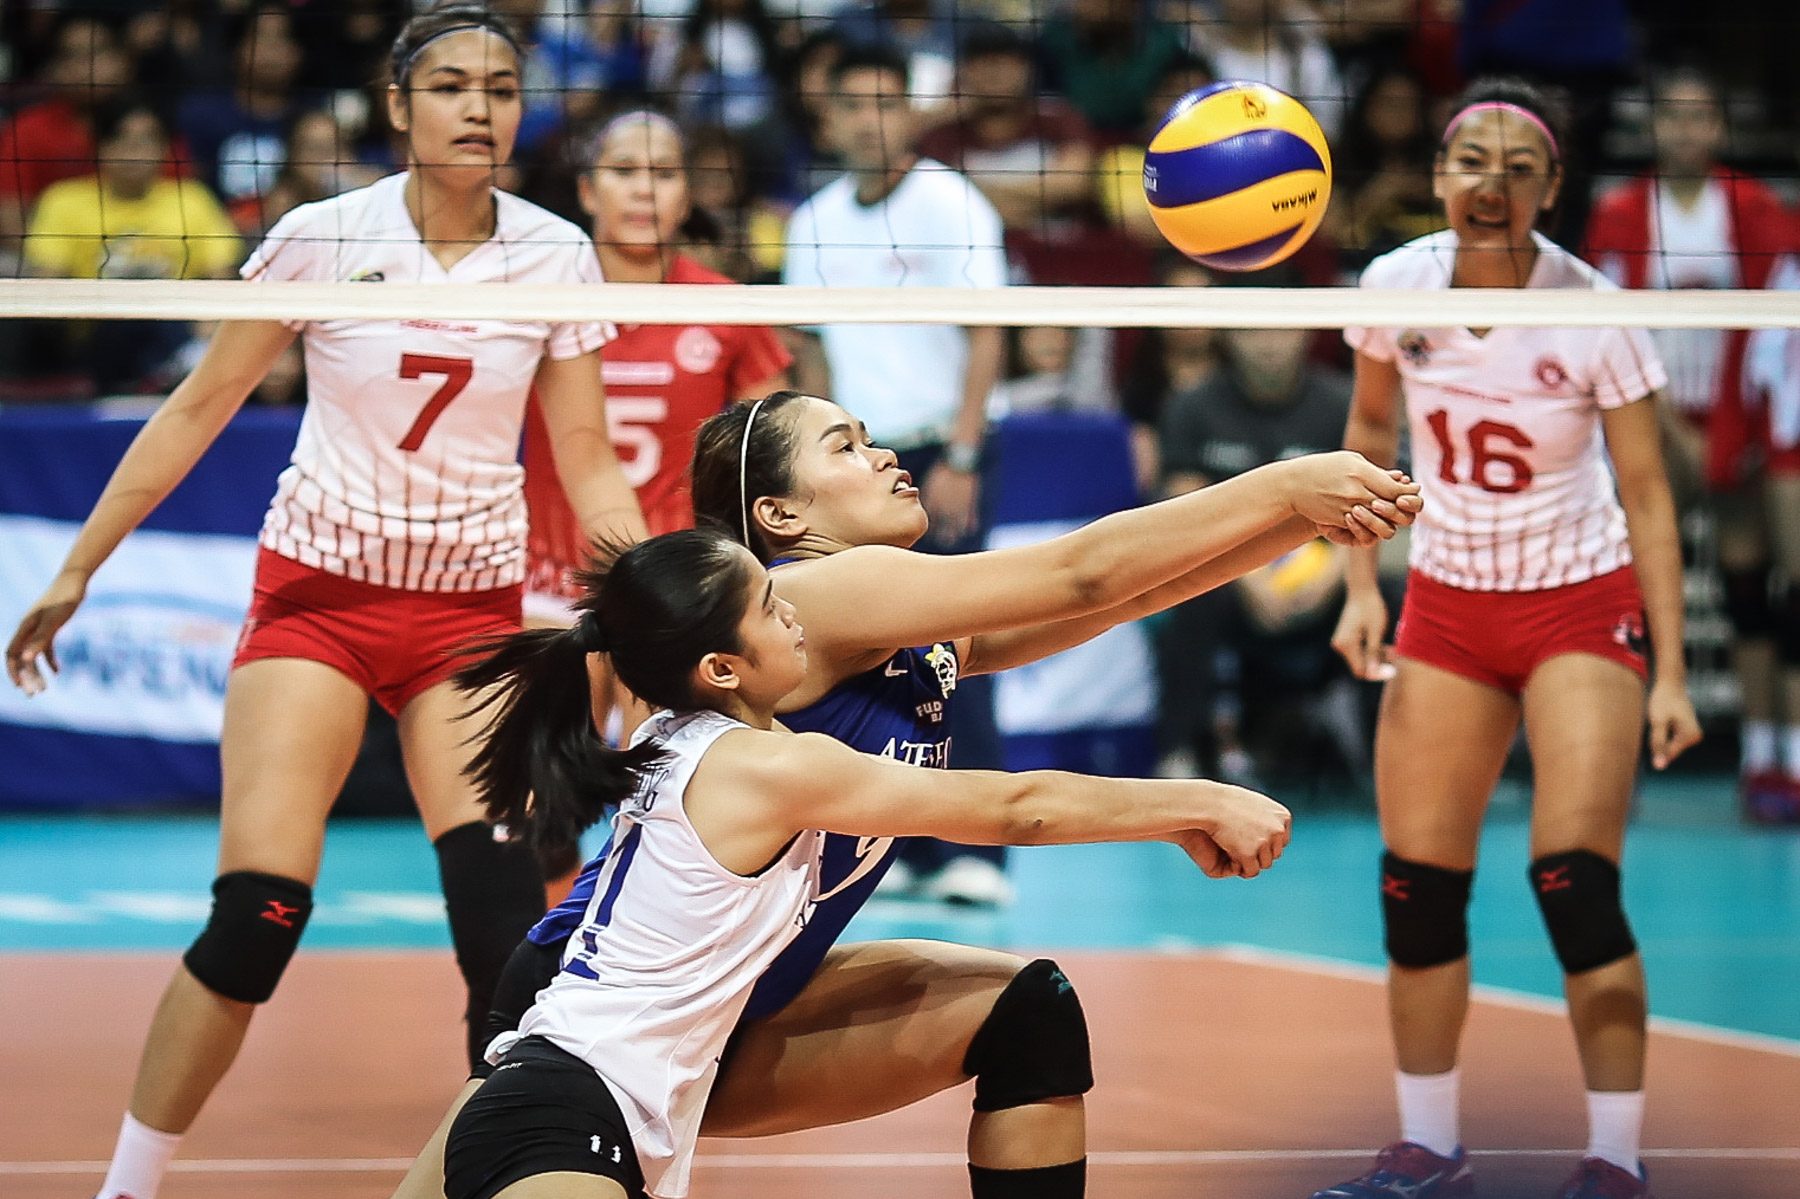 Ateneo Lady Eagles sweep UE, set up battle for top seed against La Salle